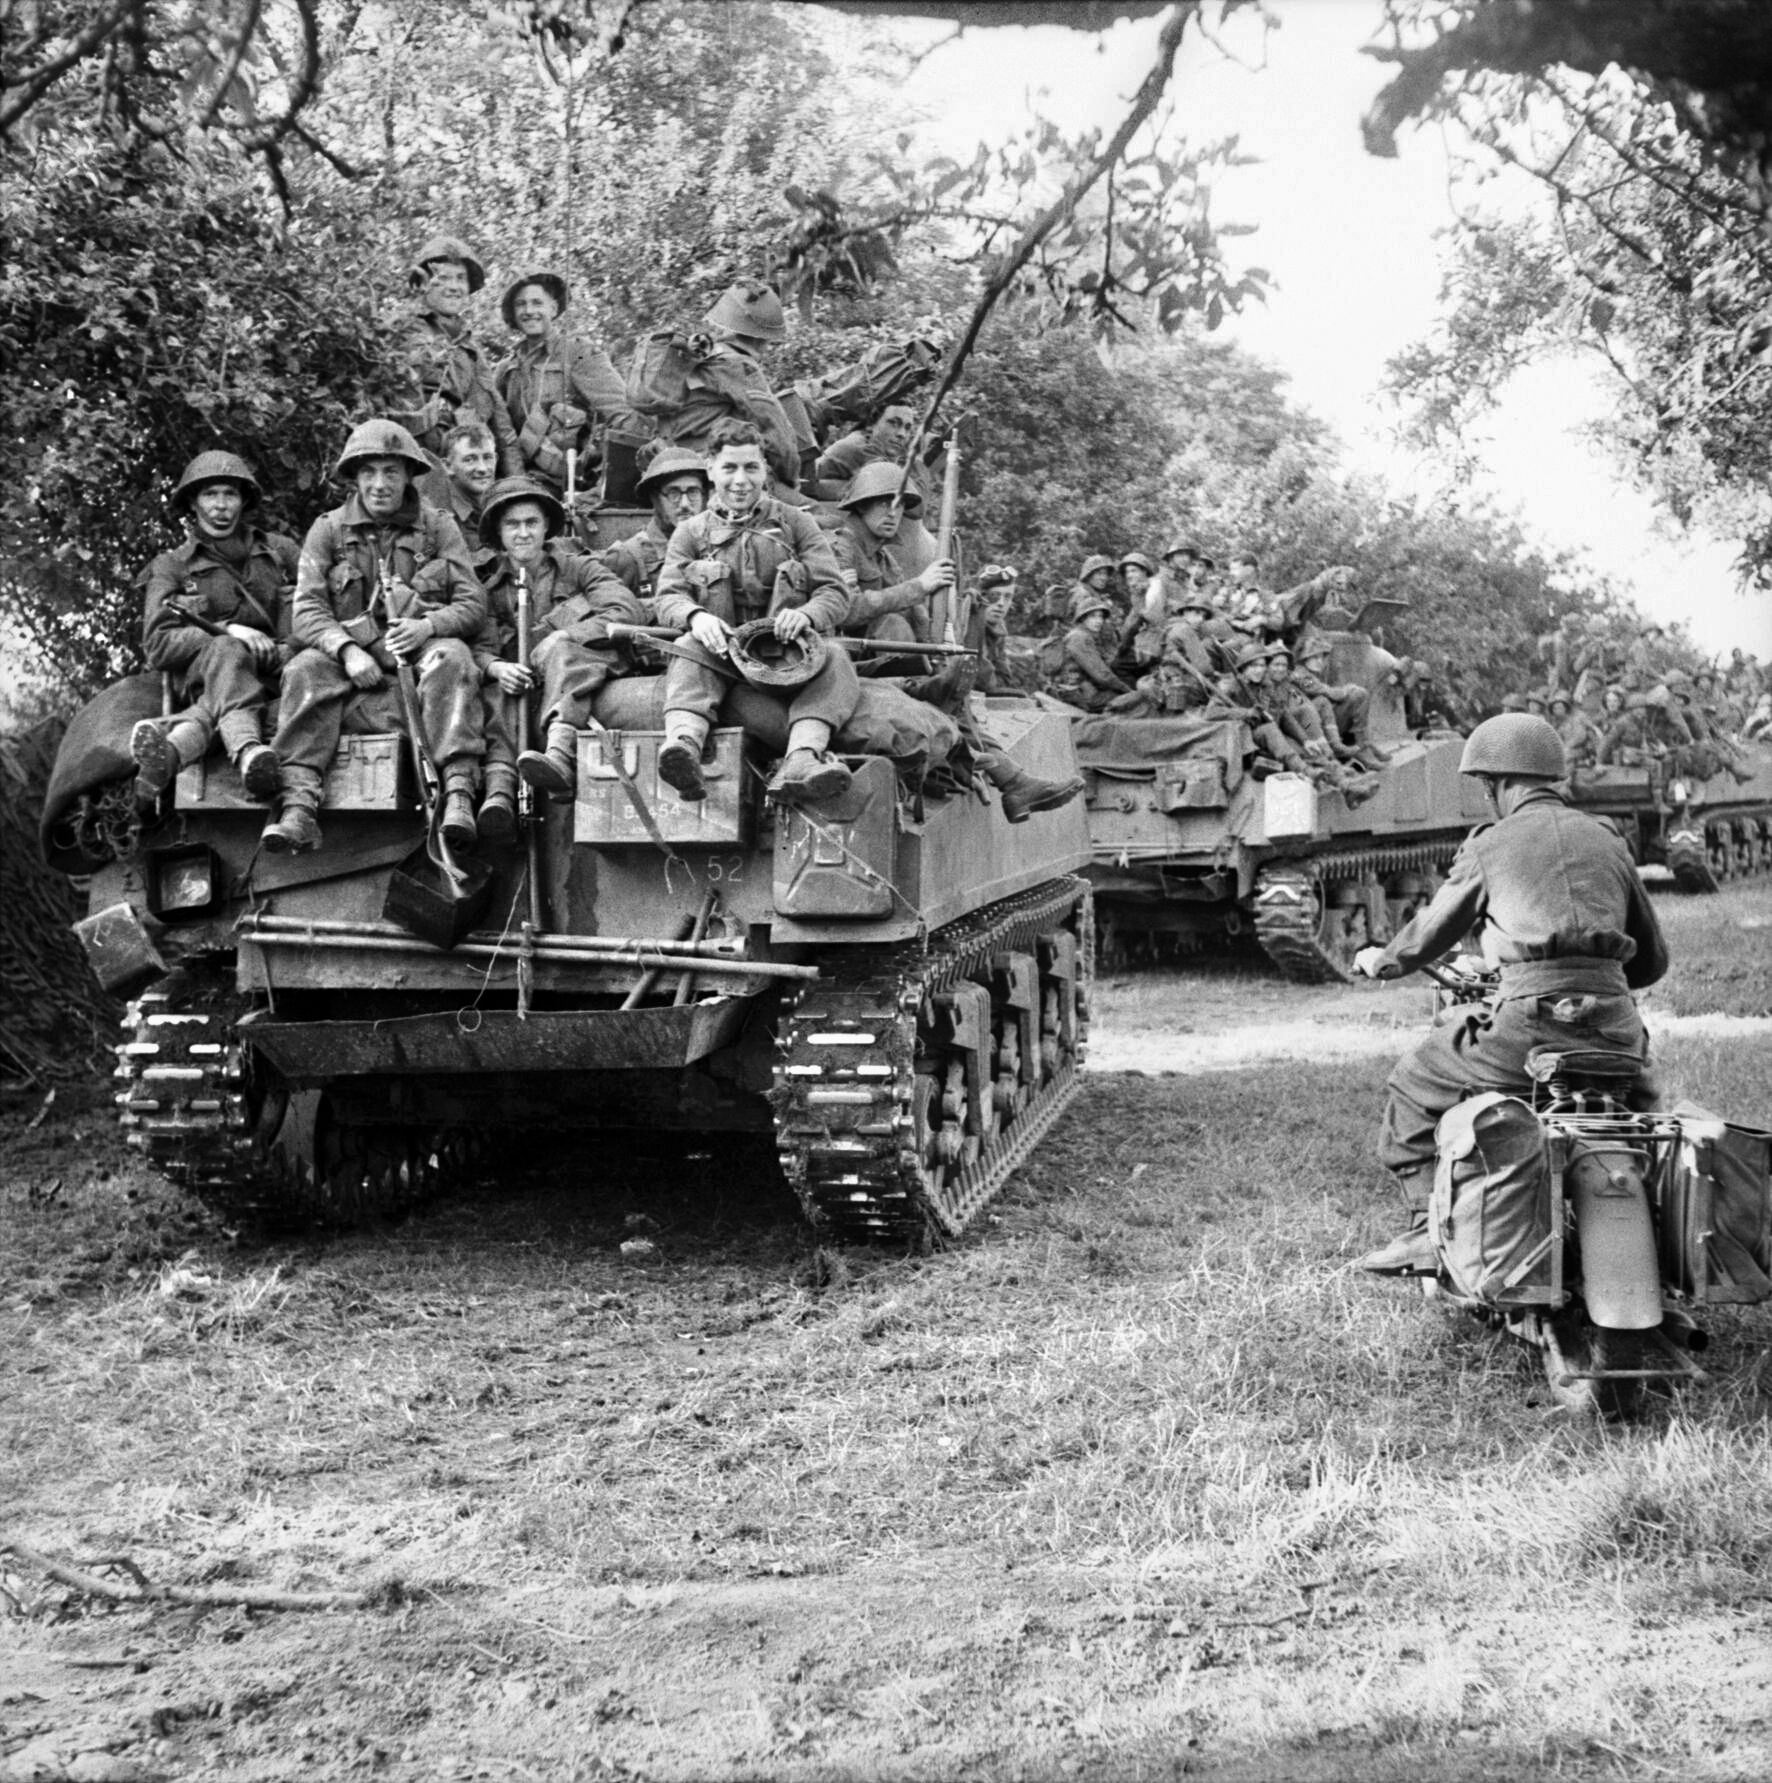 Infantrymen of the 3rd British Division ride atop tanks of the Staffordshire Yeomanry, 27th Armoured Brigade, at the start of Field Marshal Montgomery’s Operation Goodwood, July 18, 1944. Becker’s mobile artillery batteries stalled British attempts to break out of the Normandy beachhead. 